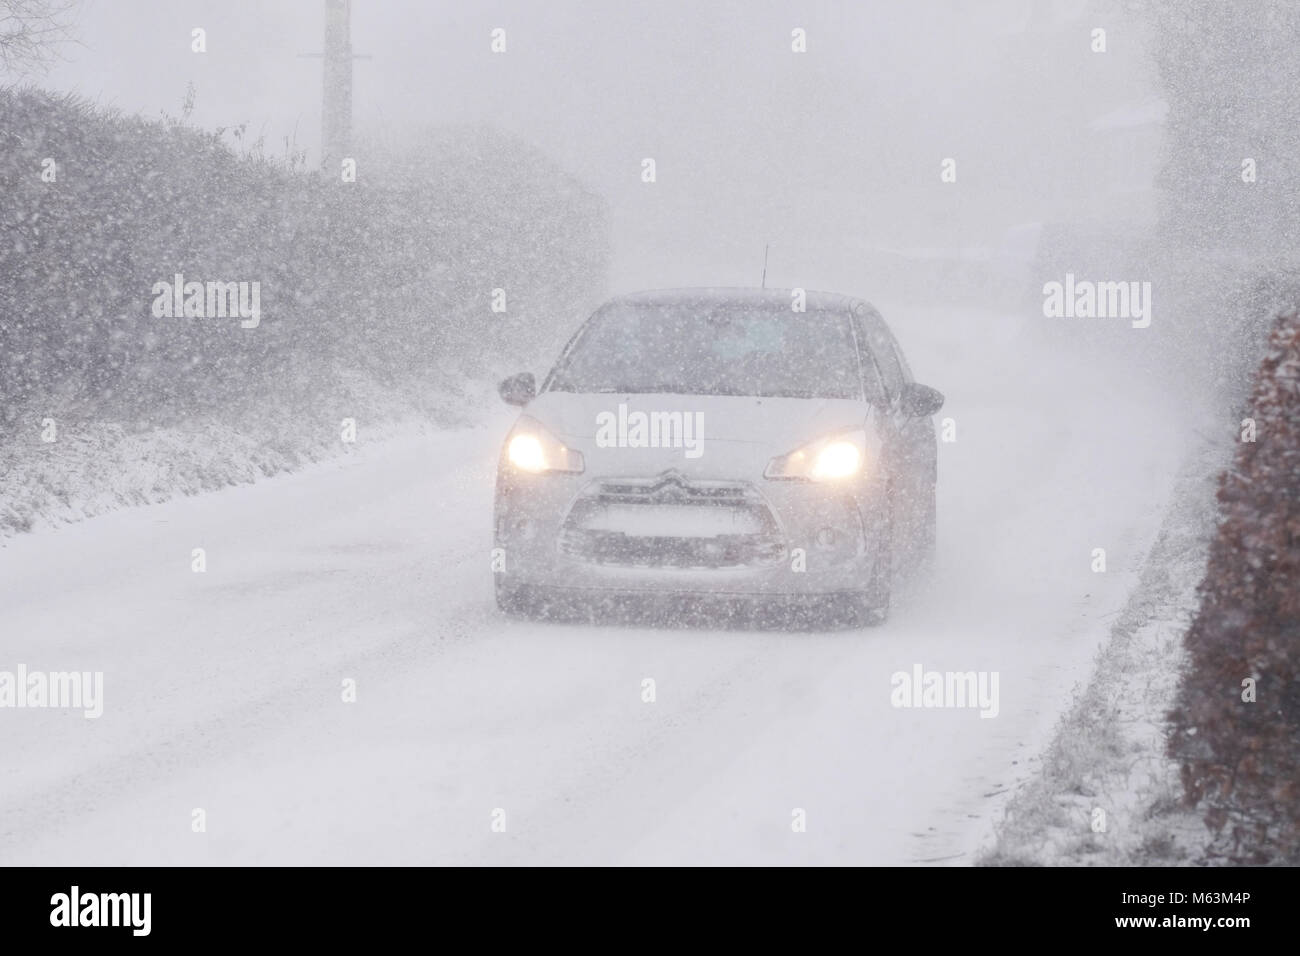 Titley, Herefordshire, UK - Wednesday 28th February 2018 - Heavy snow showers blowing in from the East at 4pm making driving conditions hazardous for car drivers in rural Herefordshire. Photo Steven May / Alamy Live News Stock Photo